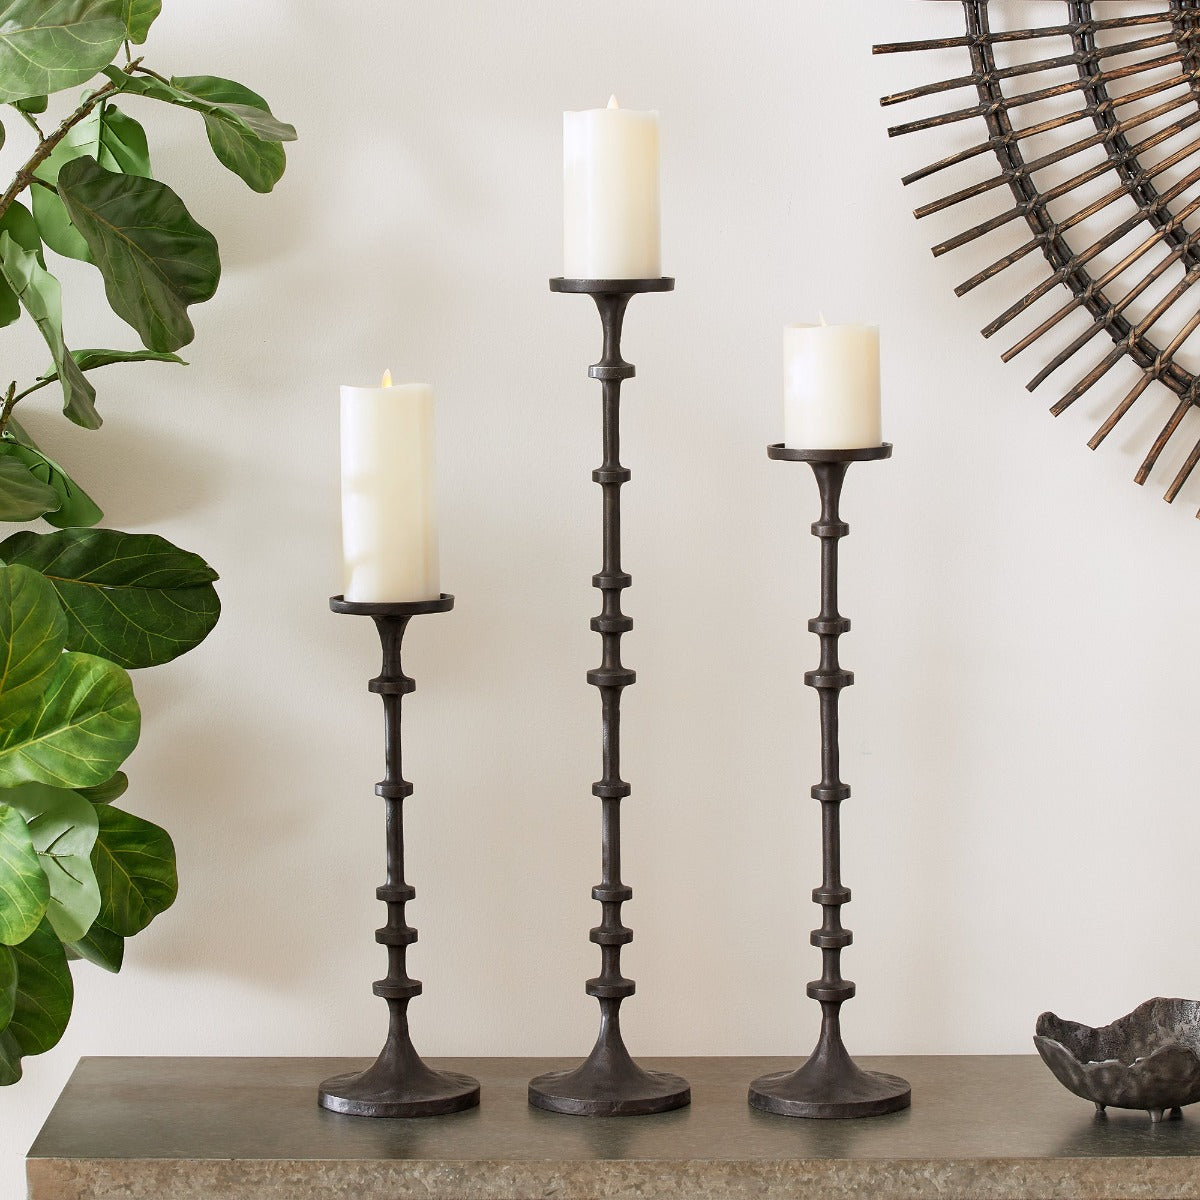  Iron Taper Candle Holder - Set of 3 Decorative Candle Stand -  Candlestick Holder for Wedding, Dinning, Party - Antique Brass : Home &  Kitchen